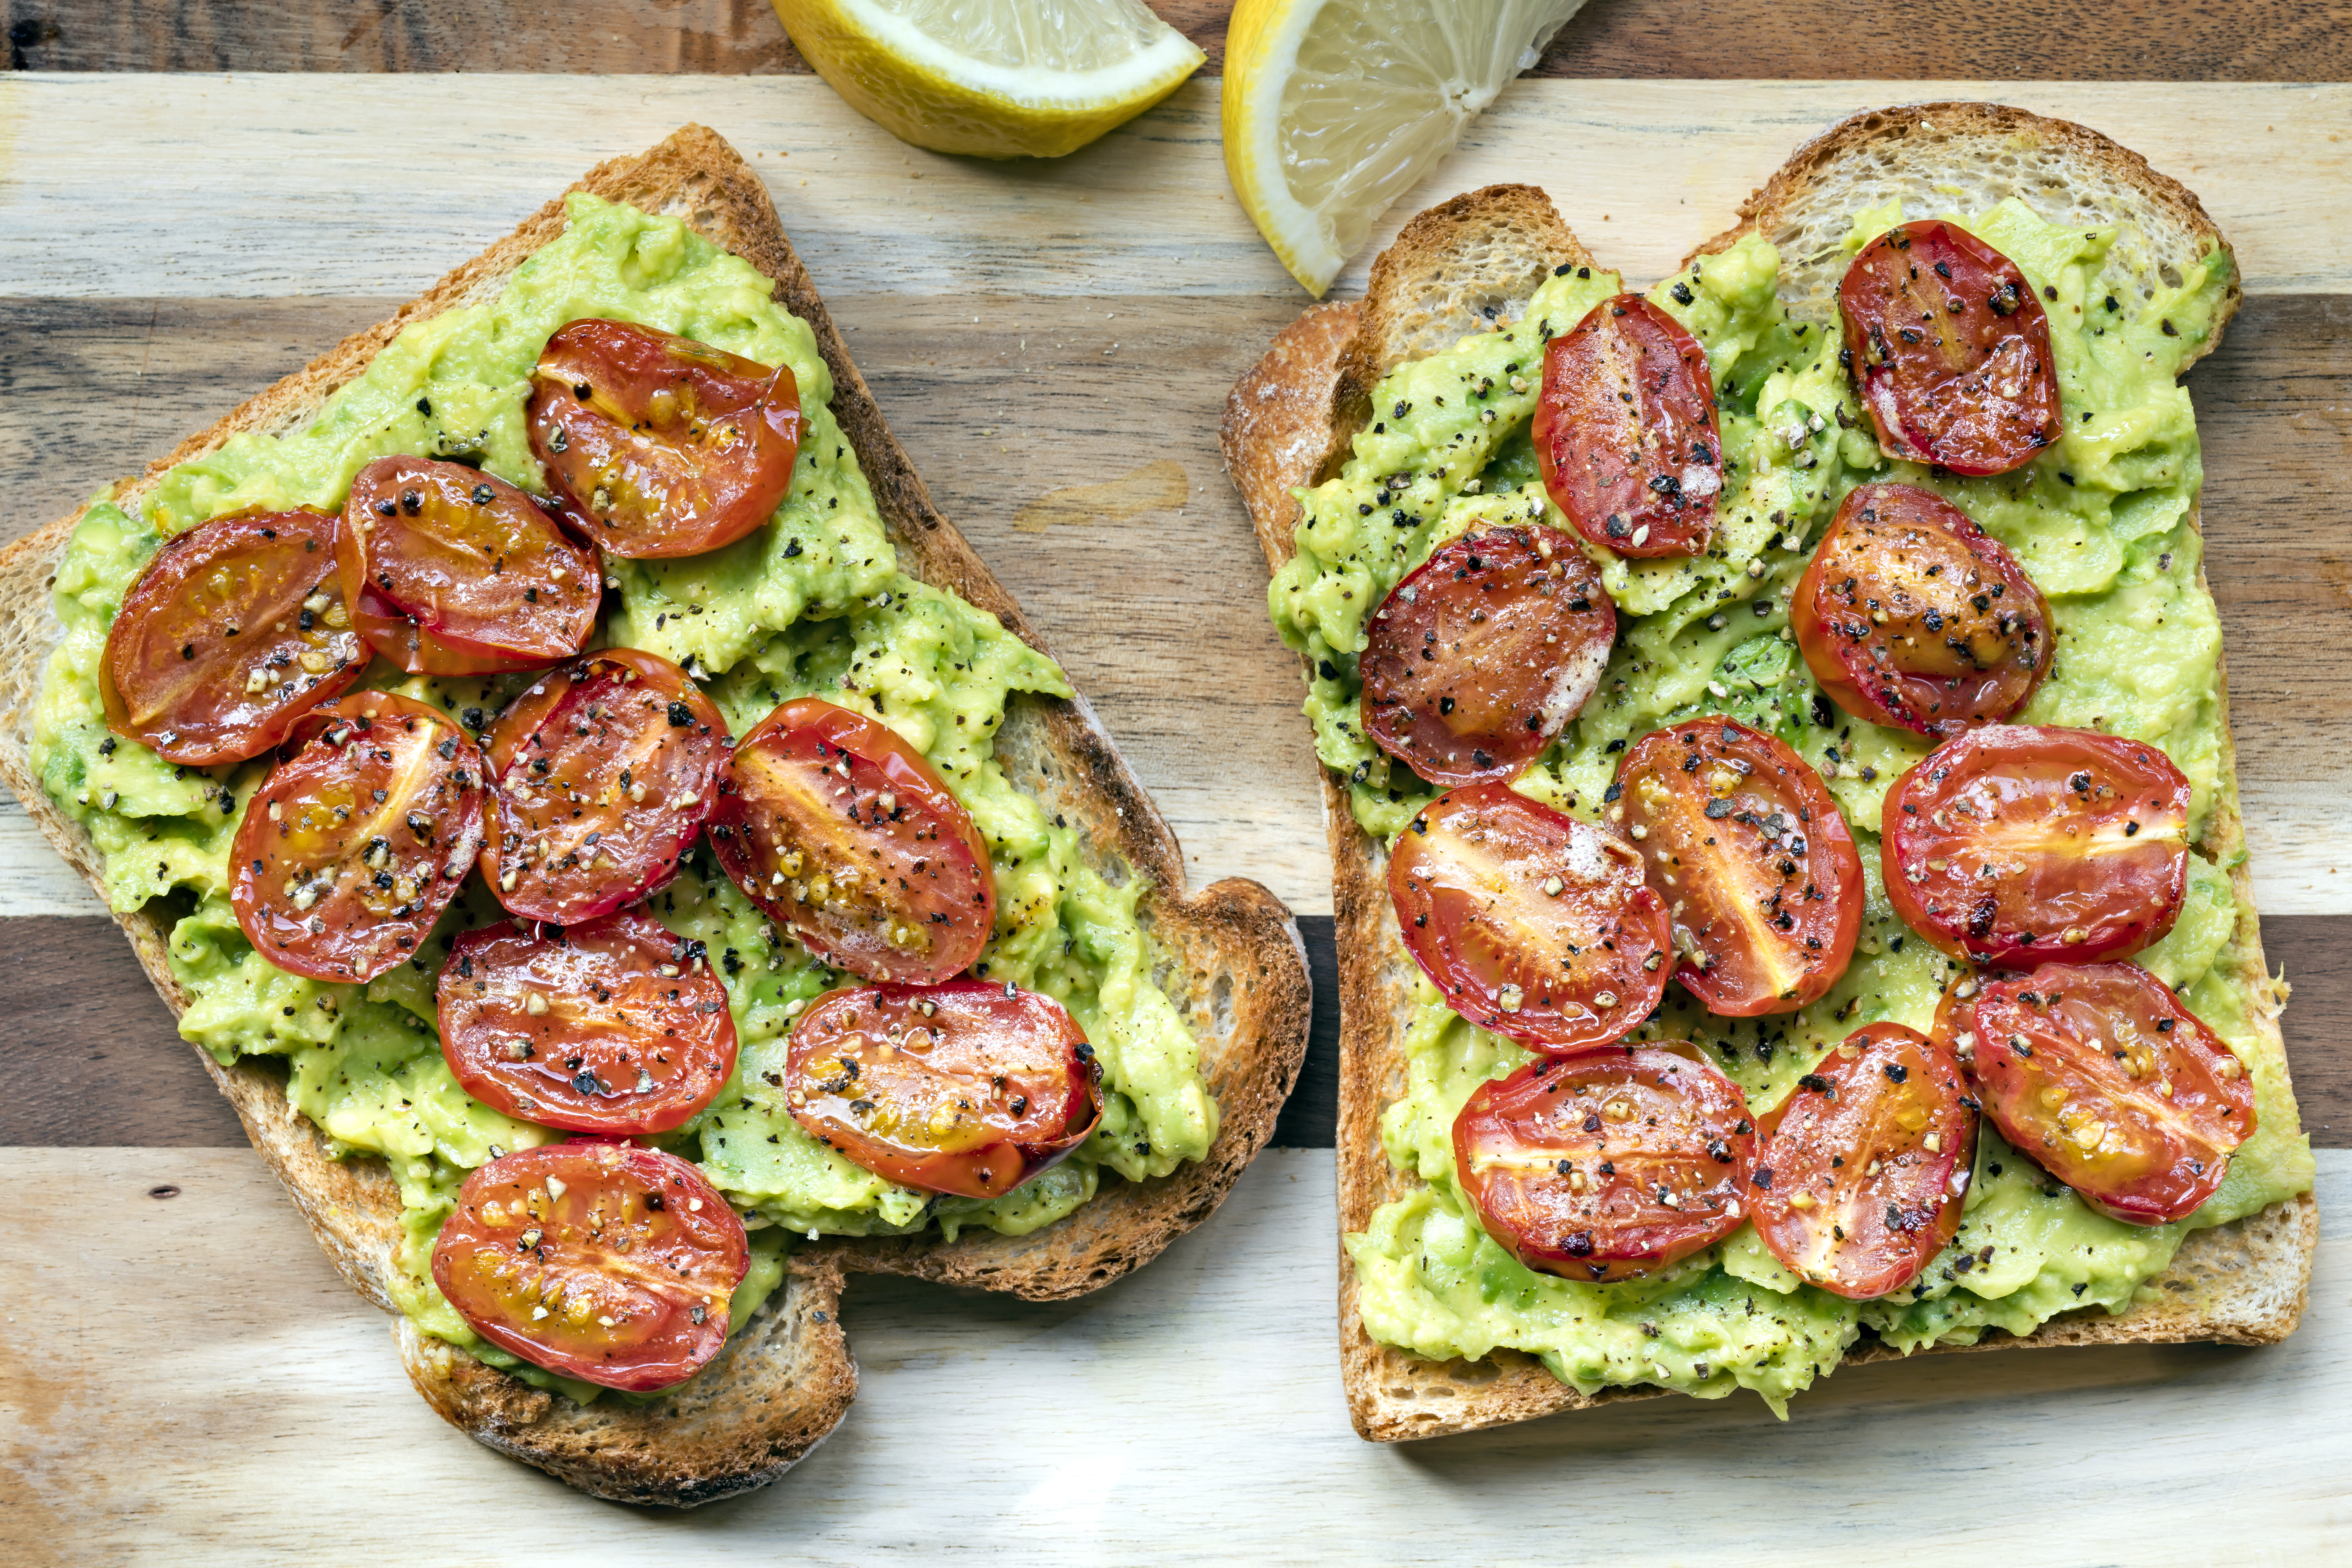 Avocado Toast with Roasted Cherry Tomatoes